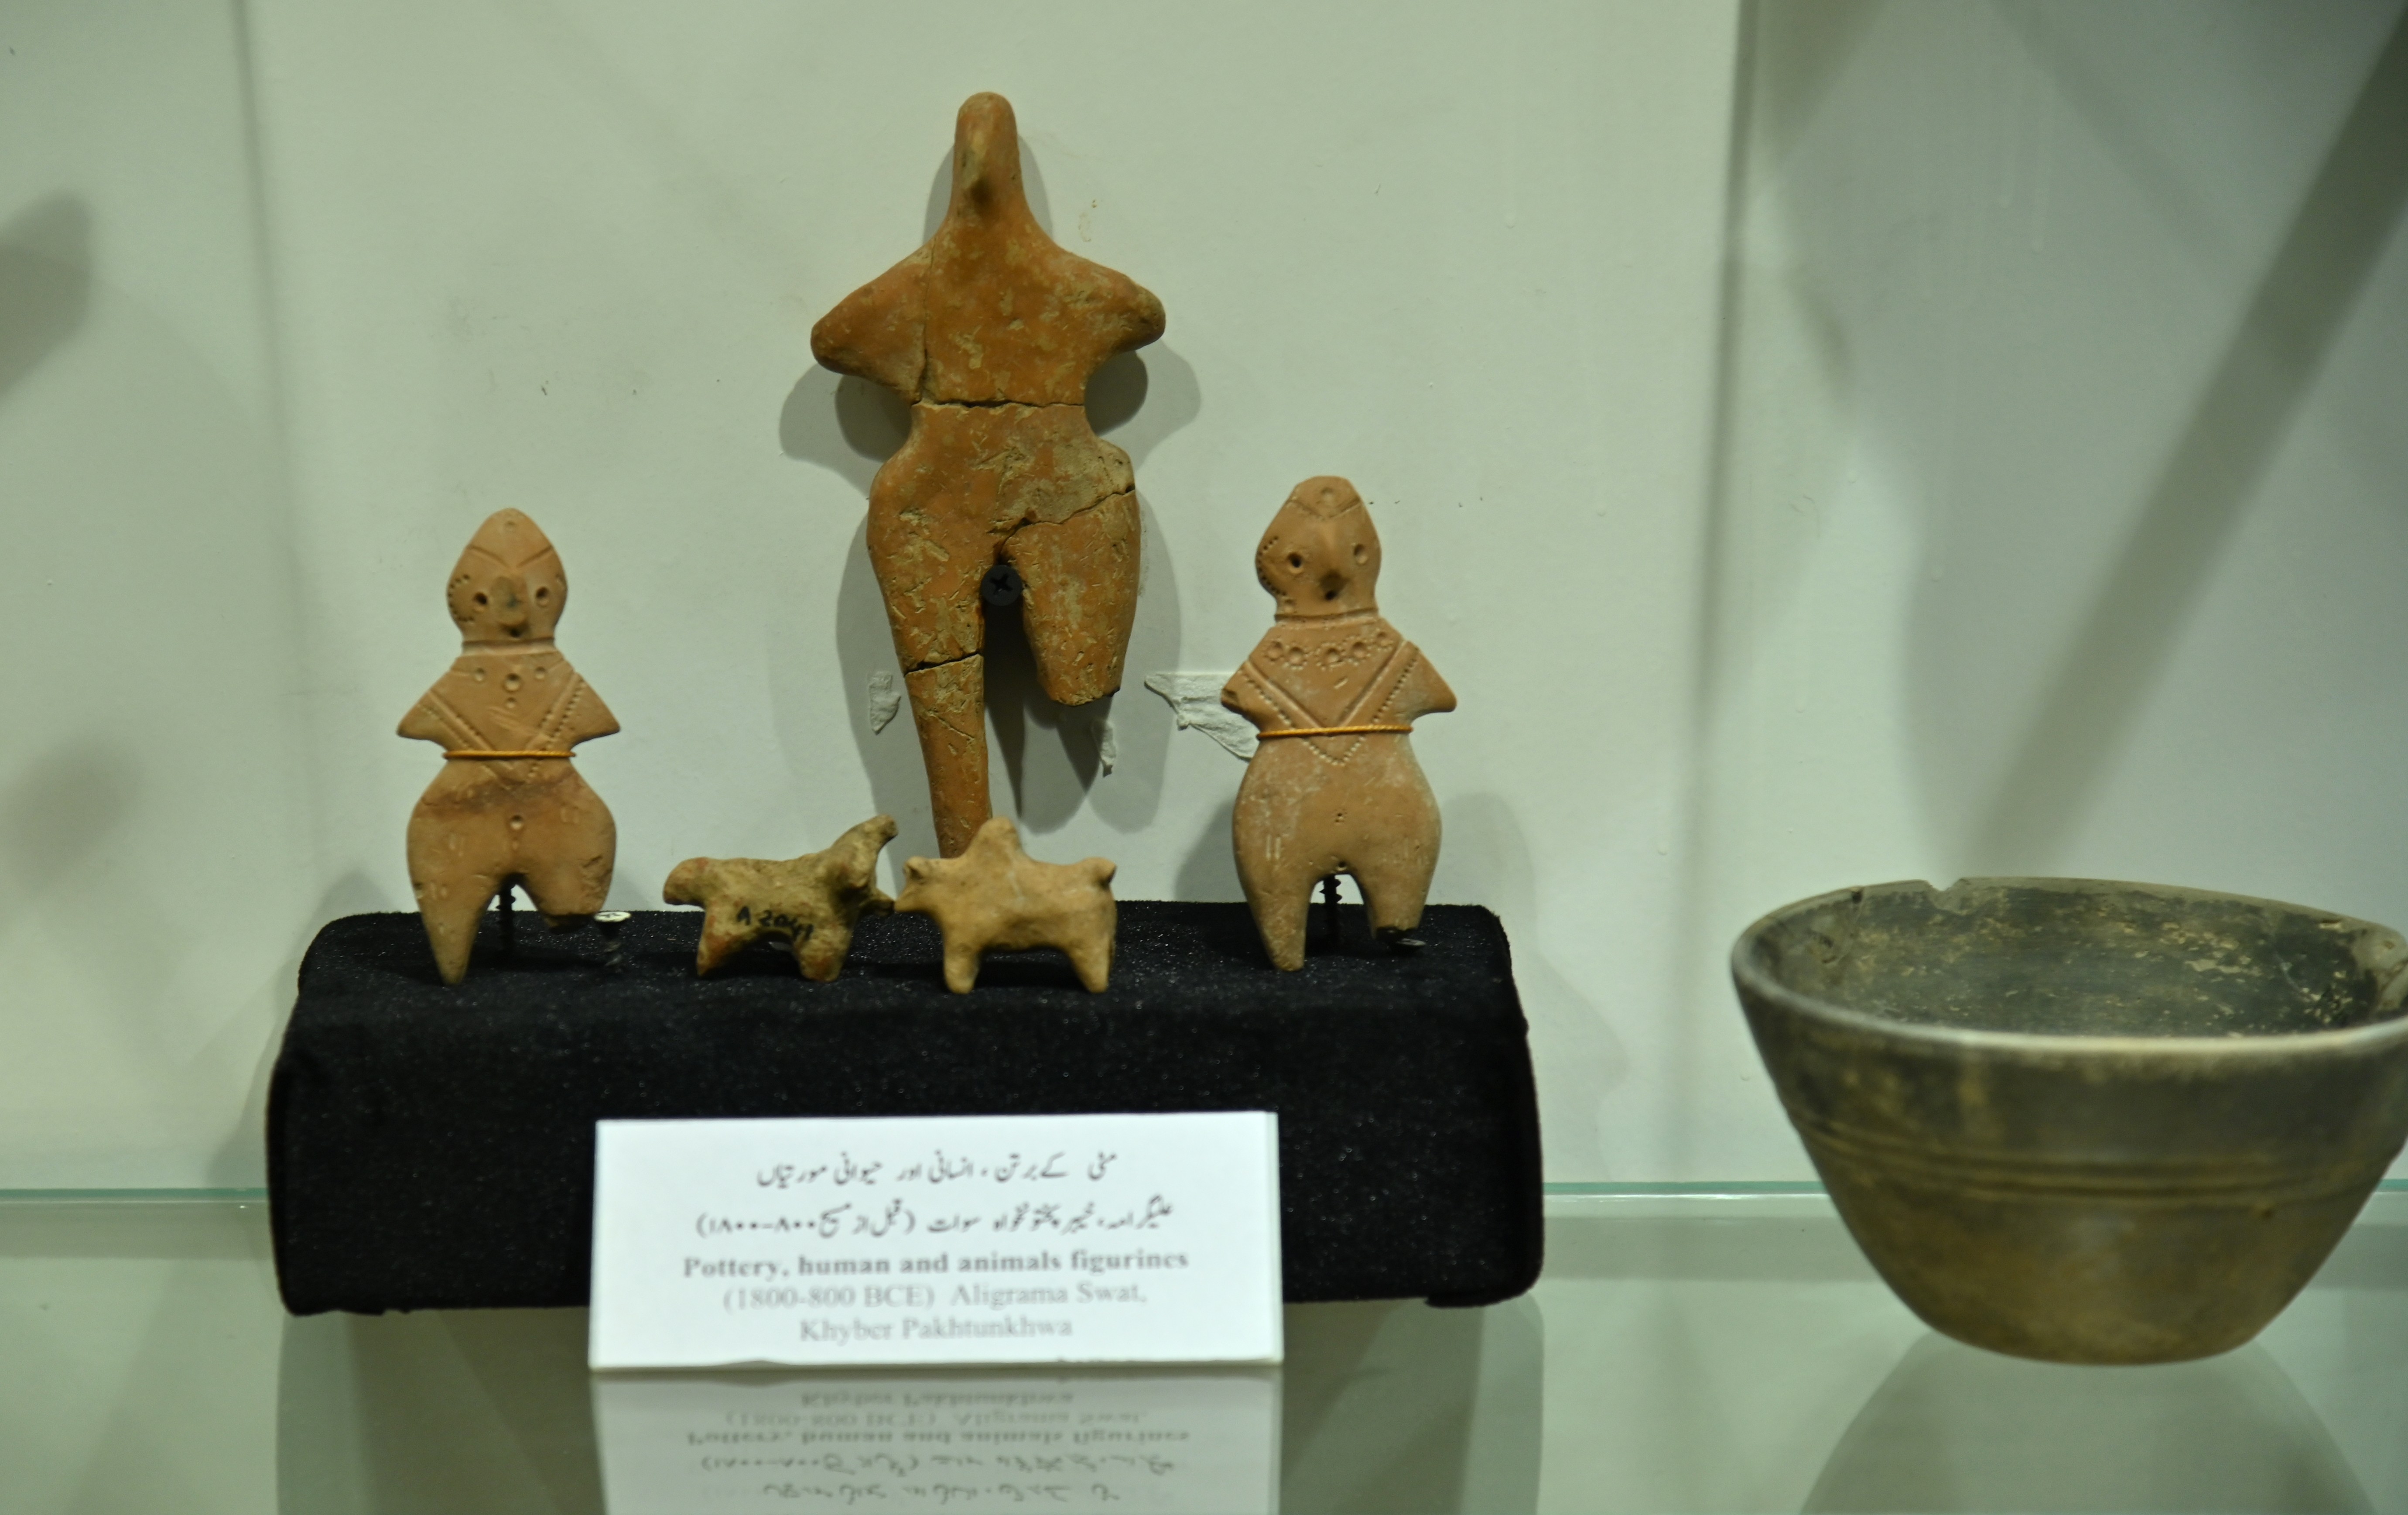 The collection of Pottery, Human and Animal Figurines